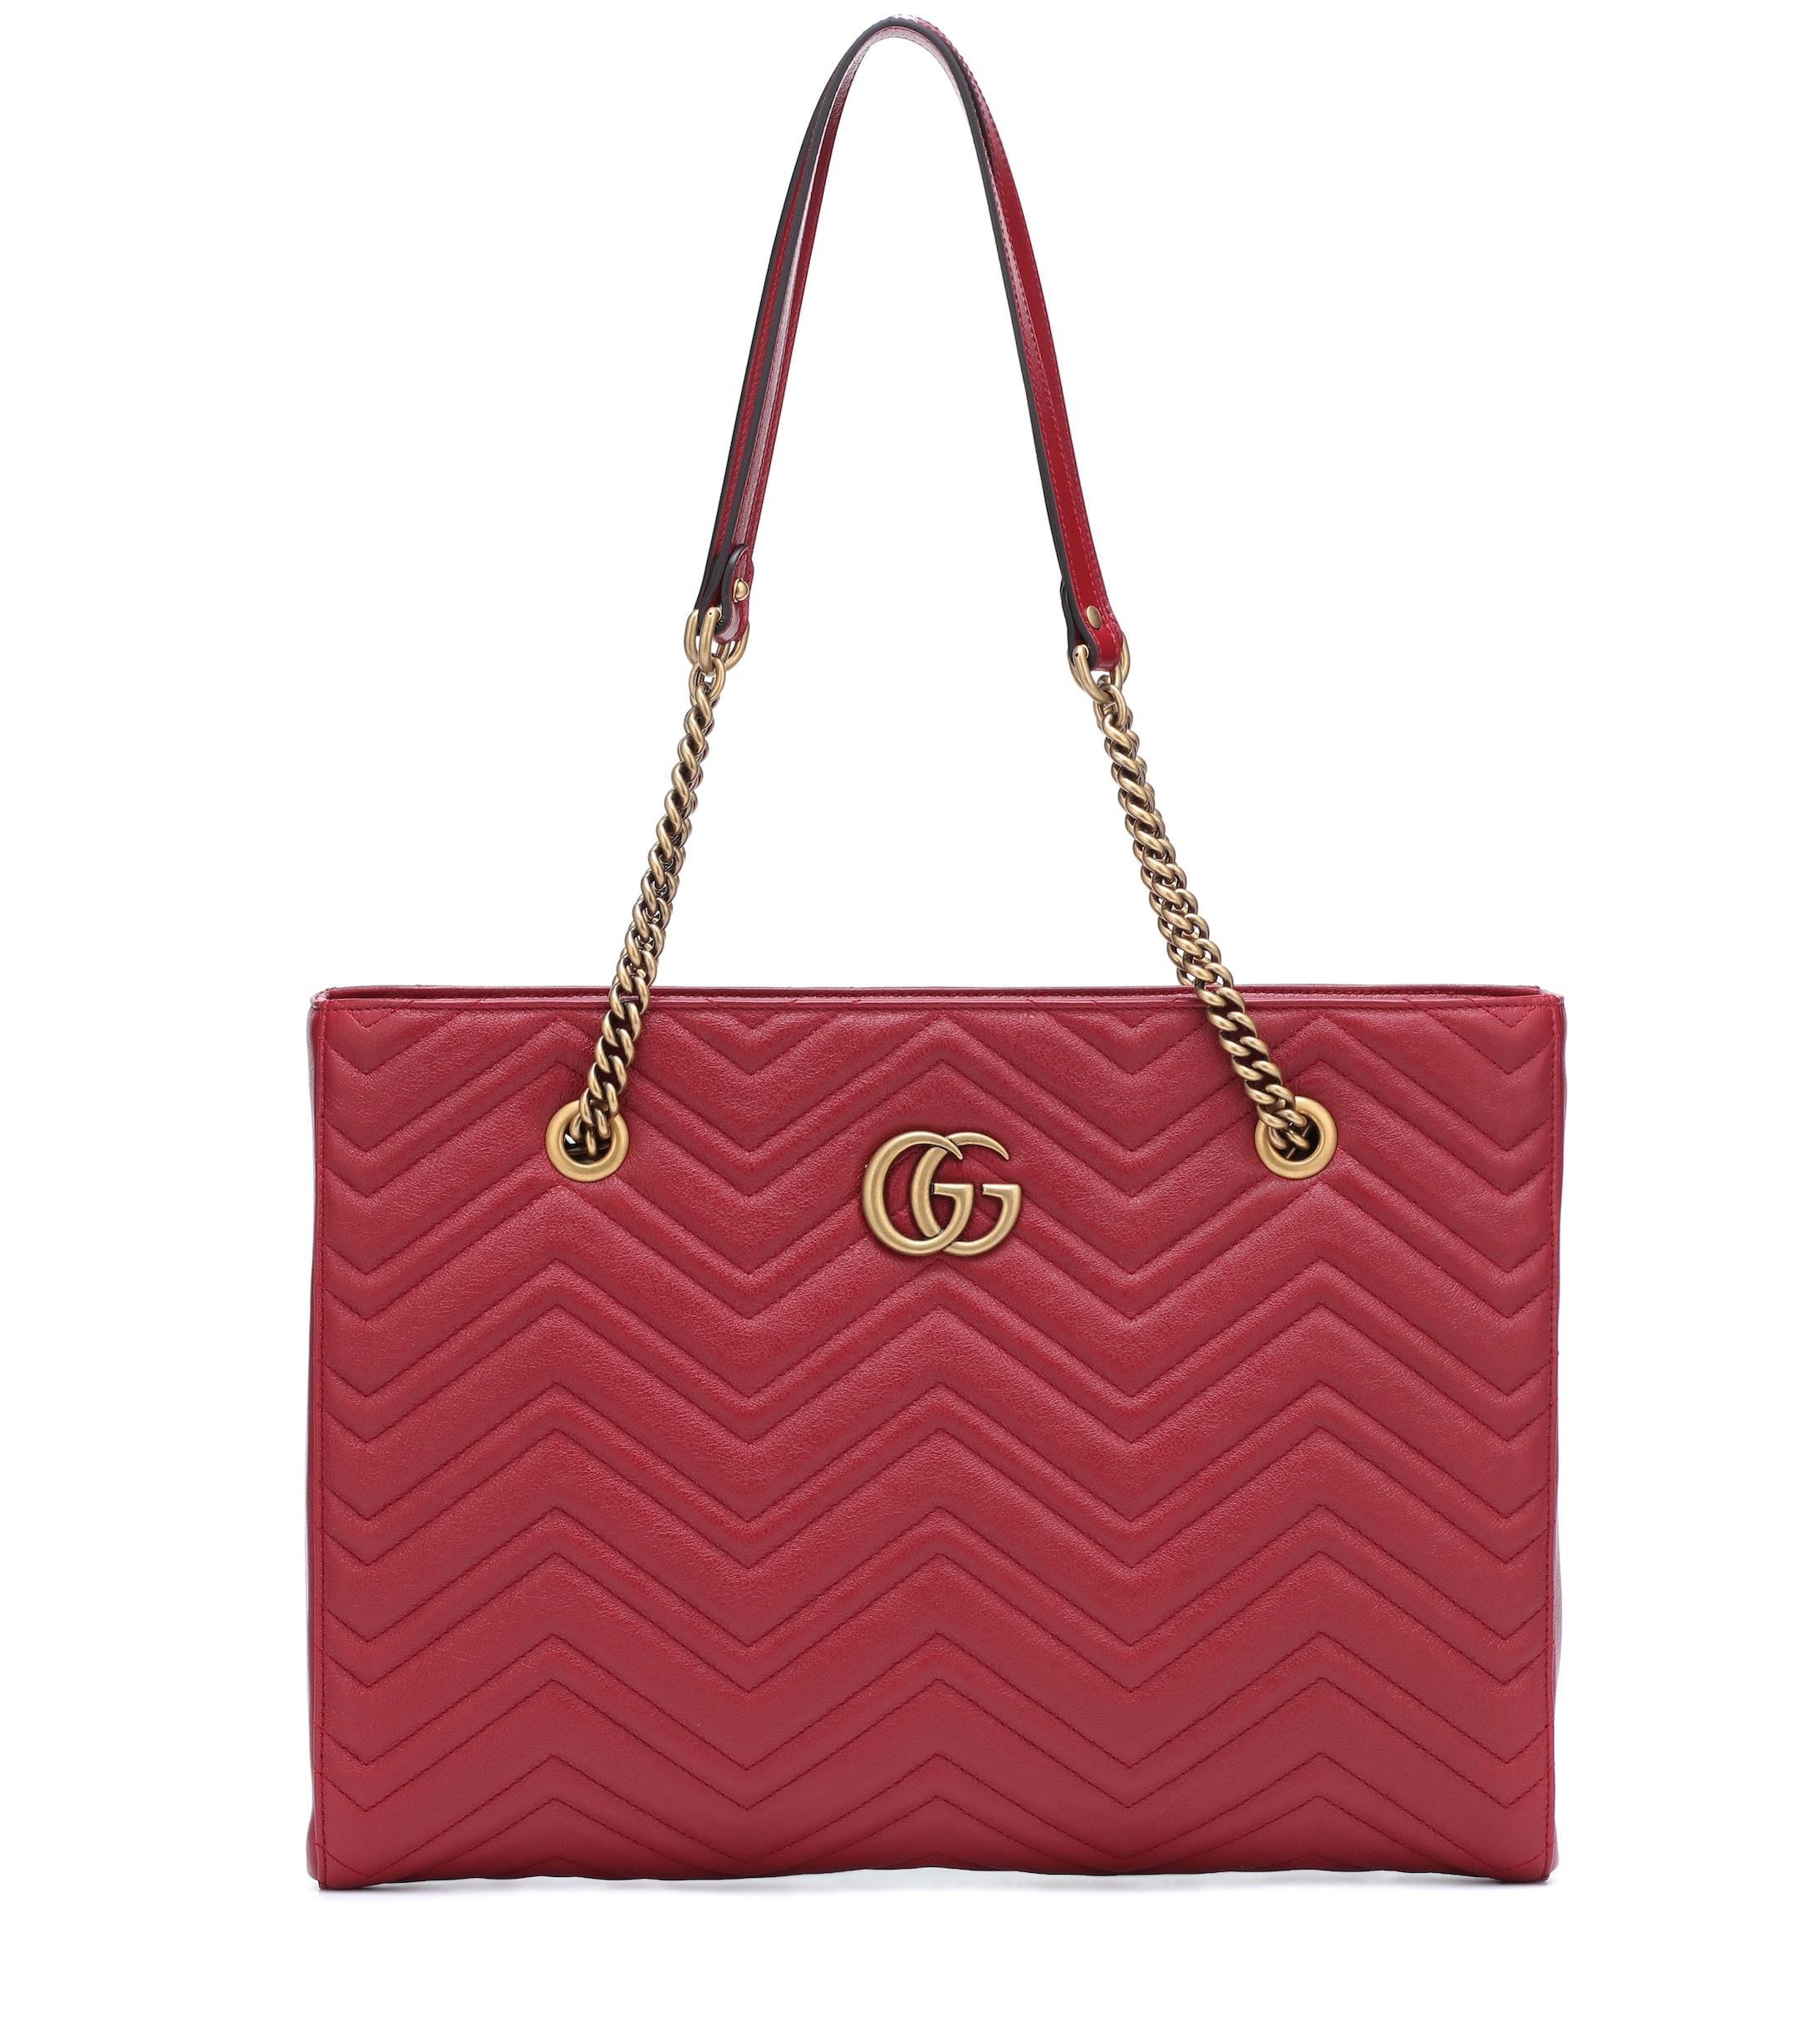 Gucci GG Marmont Leather Tote in Red - Lyst